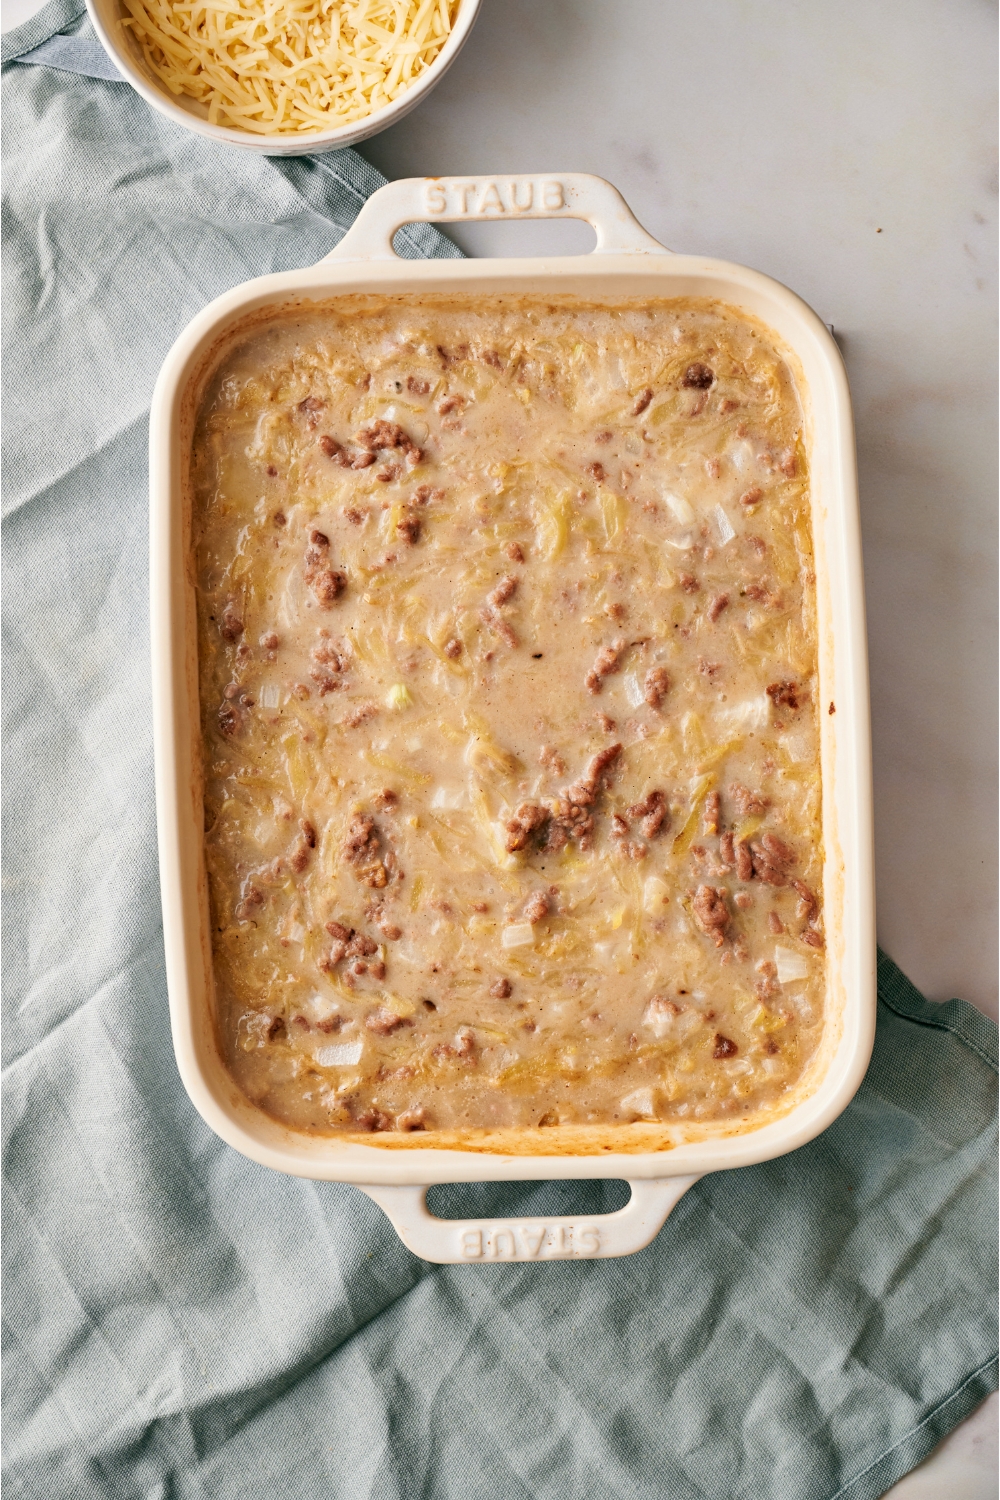 A white baking dish filled with unbaked ground beef and hashbrown casserole.